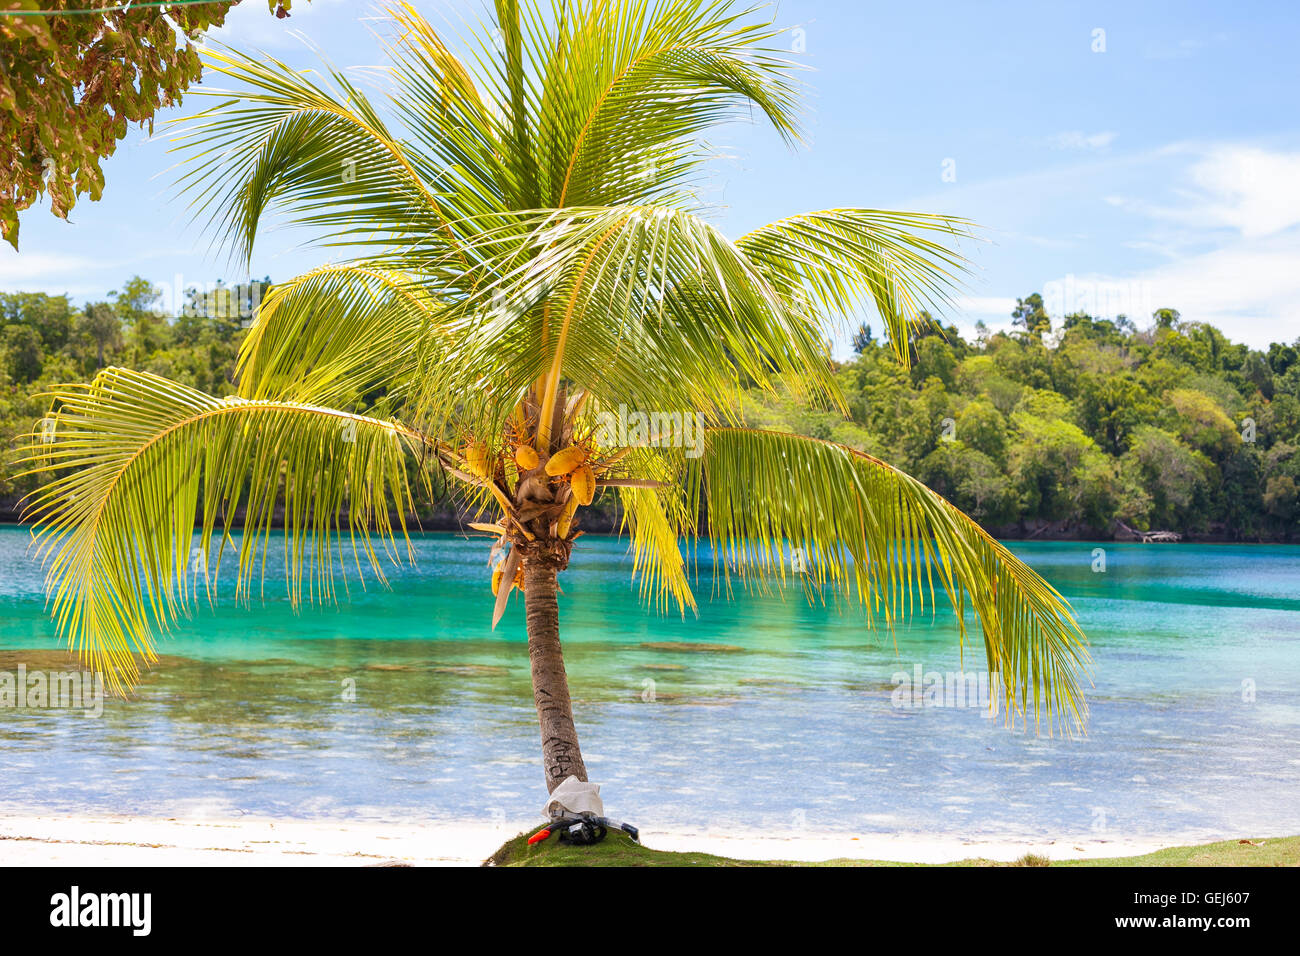 Photo Untouched Tropical Beach in Bali Island. Palm with fruits. Vertical Picture. Fishboat Blurred Background. Snorkeling Equipment. Stock Photo